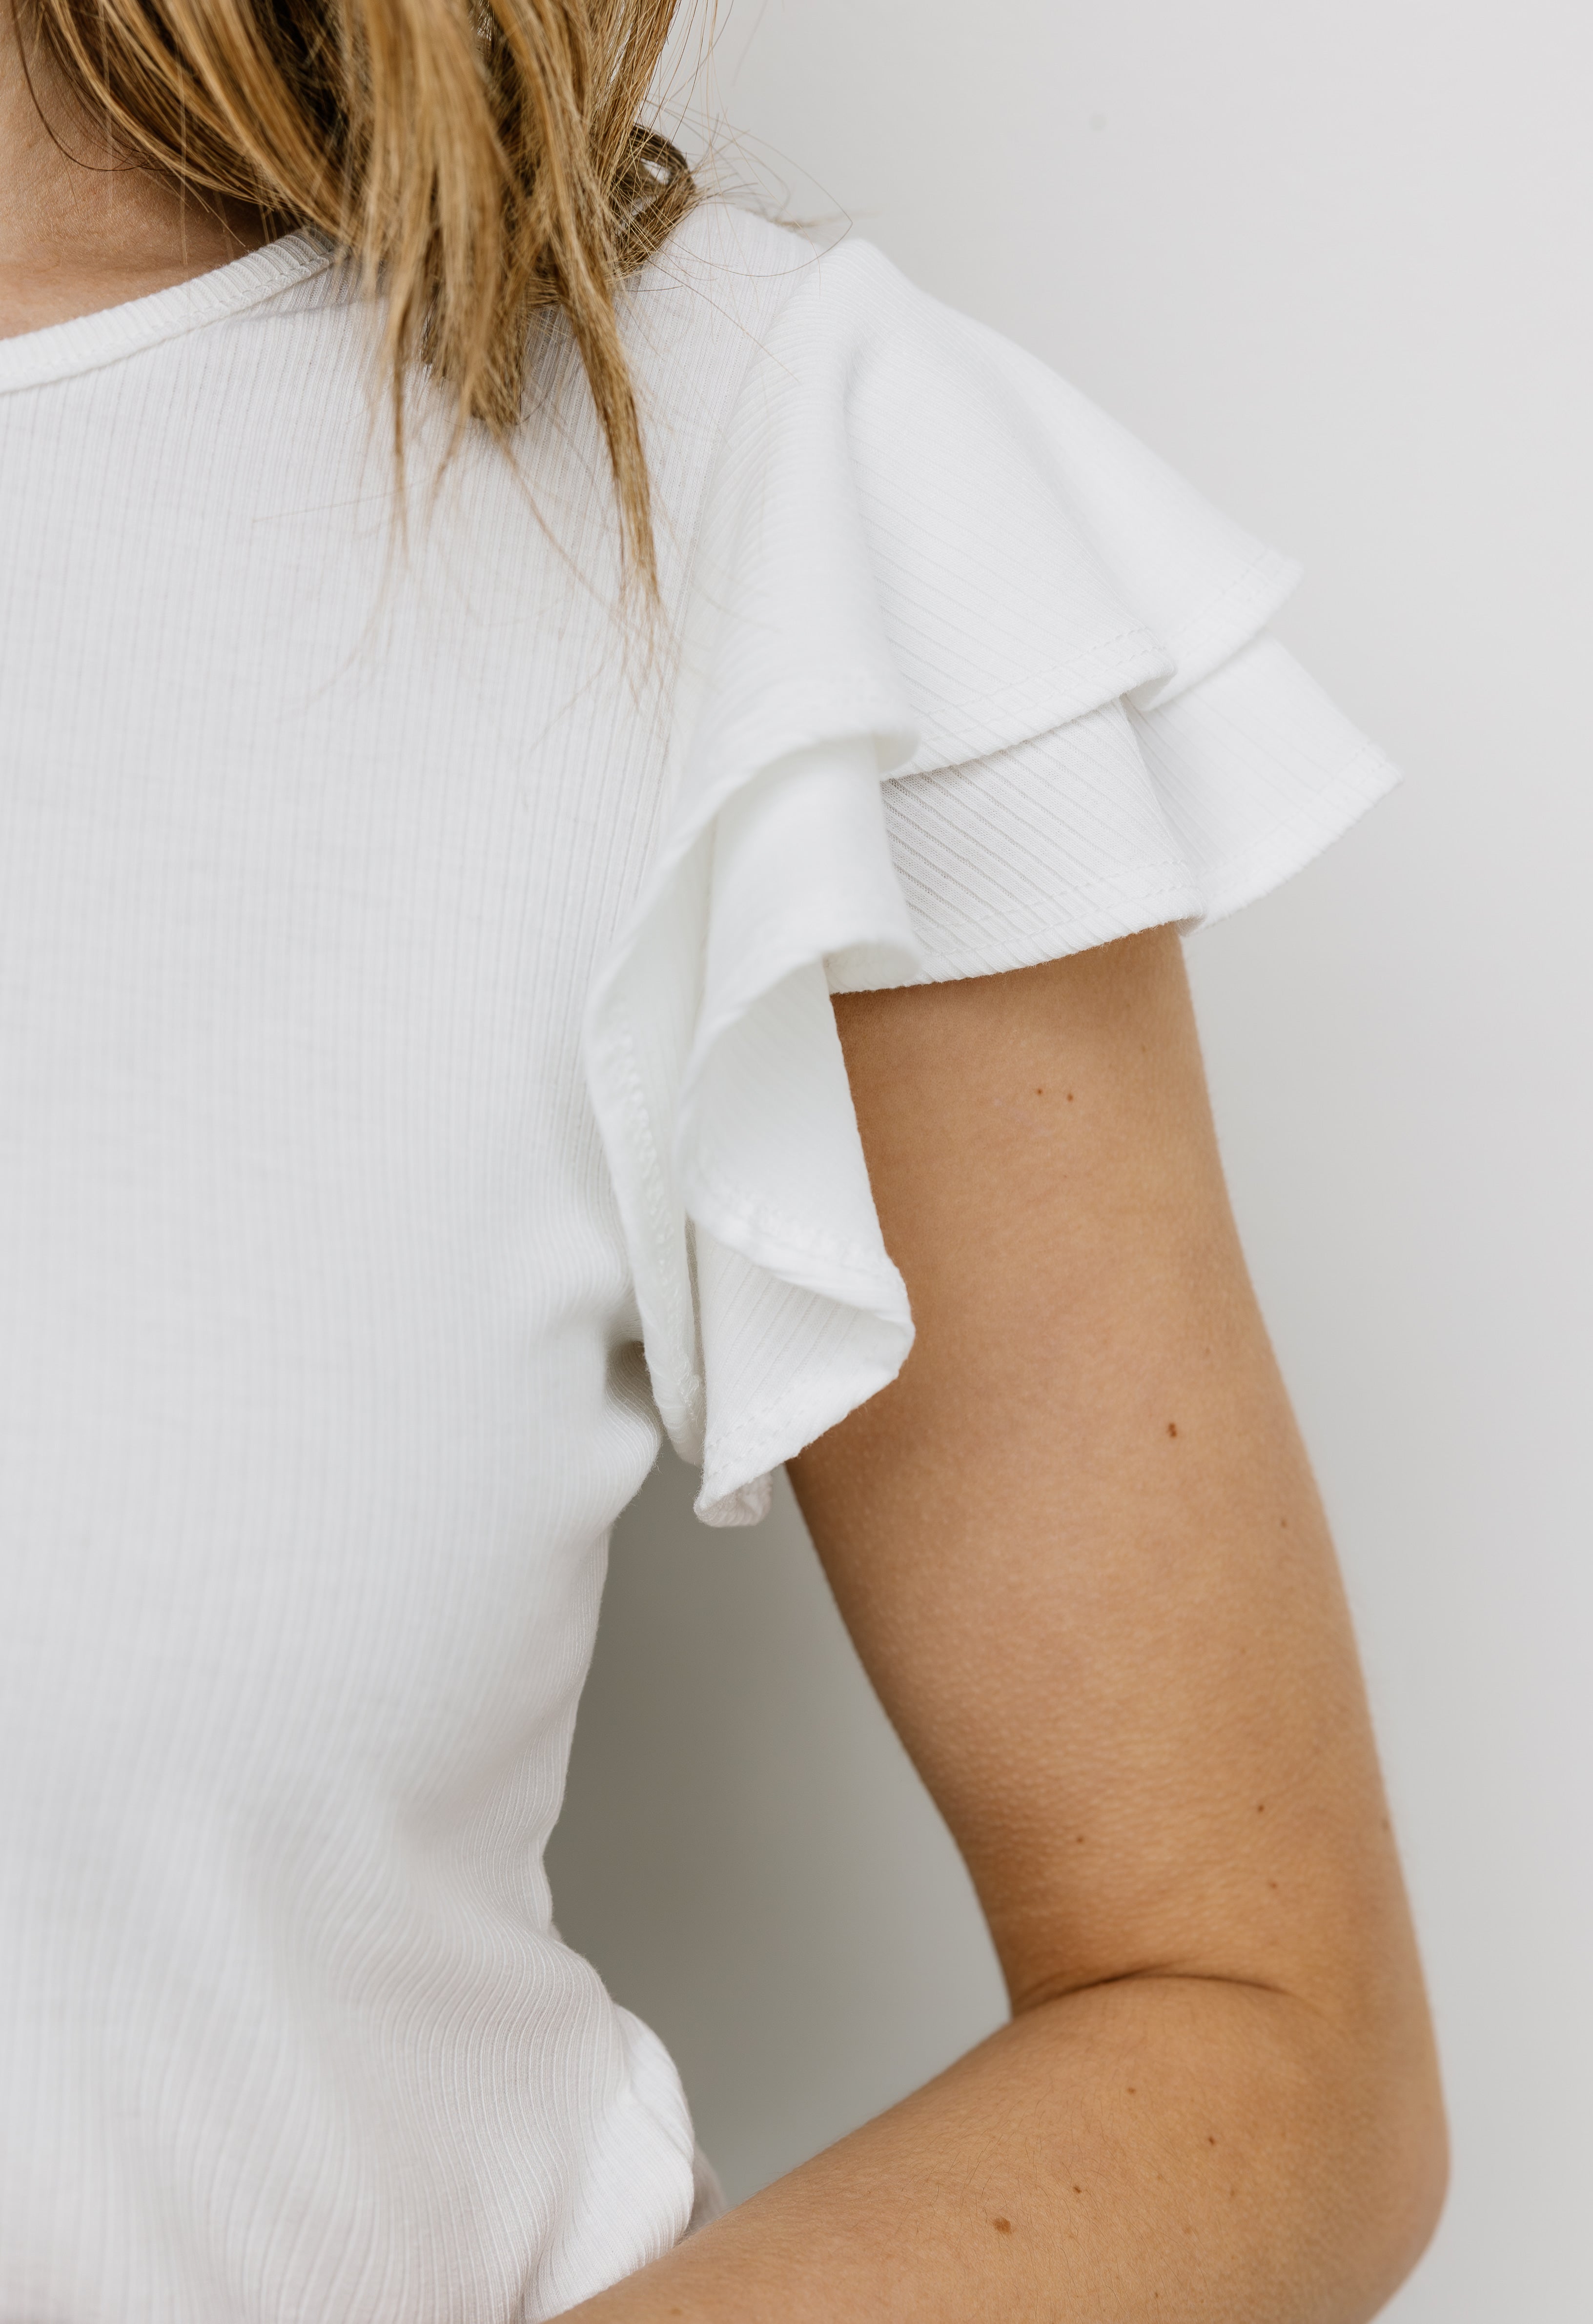 Carlotta Top - IVORY - willows clothing S/S Shirt